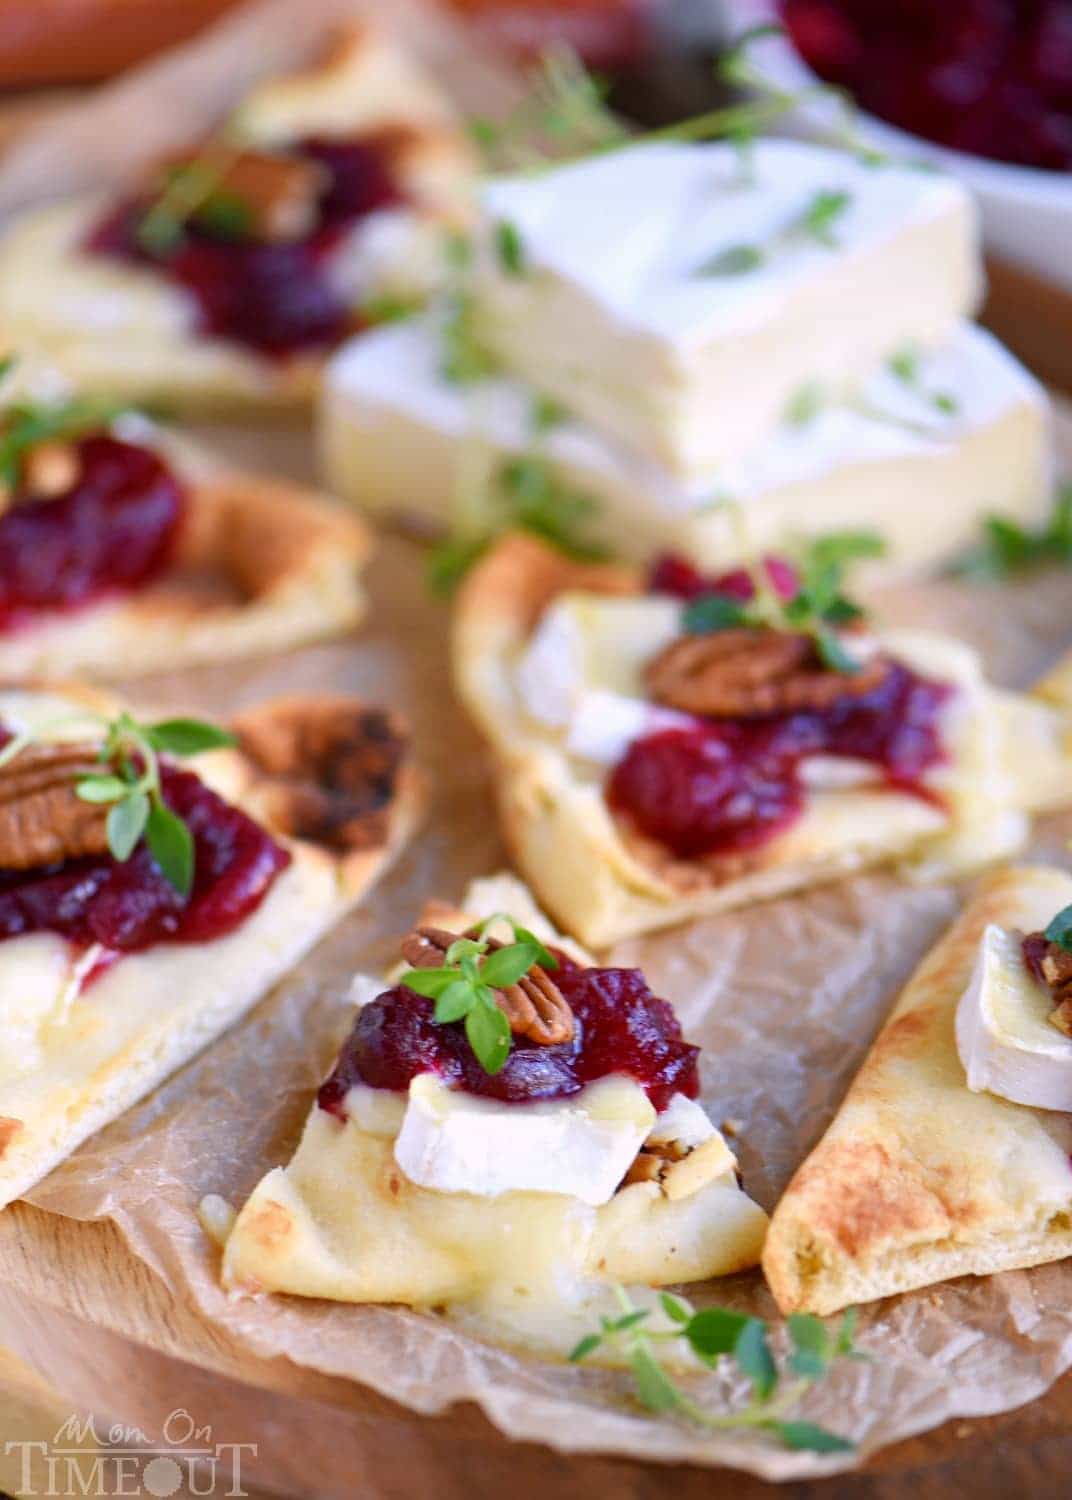 These Cranberry Pecan Brie Bites are perfect for holiday entertaining! Whether you make them for Thanksgiving, Christmas, or New Year's, no one will be able to resist the gooey melted brie, tart cranberry sauce, and toasted pecan atop a piece of naan! Easy and fabulous - just what holiday entertaining should be! // Mom On Timeout